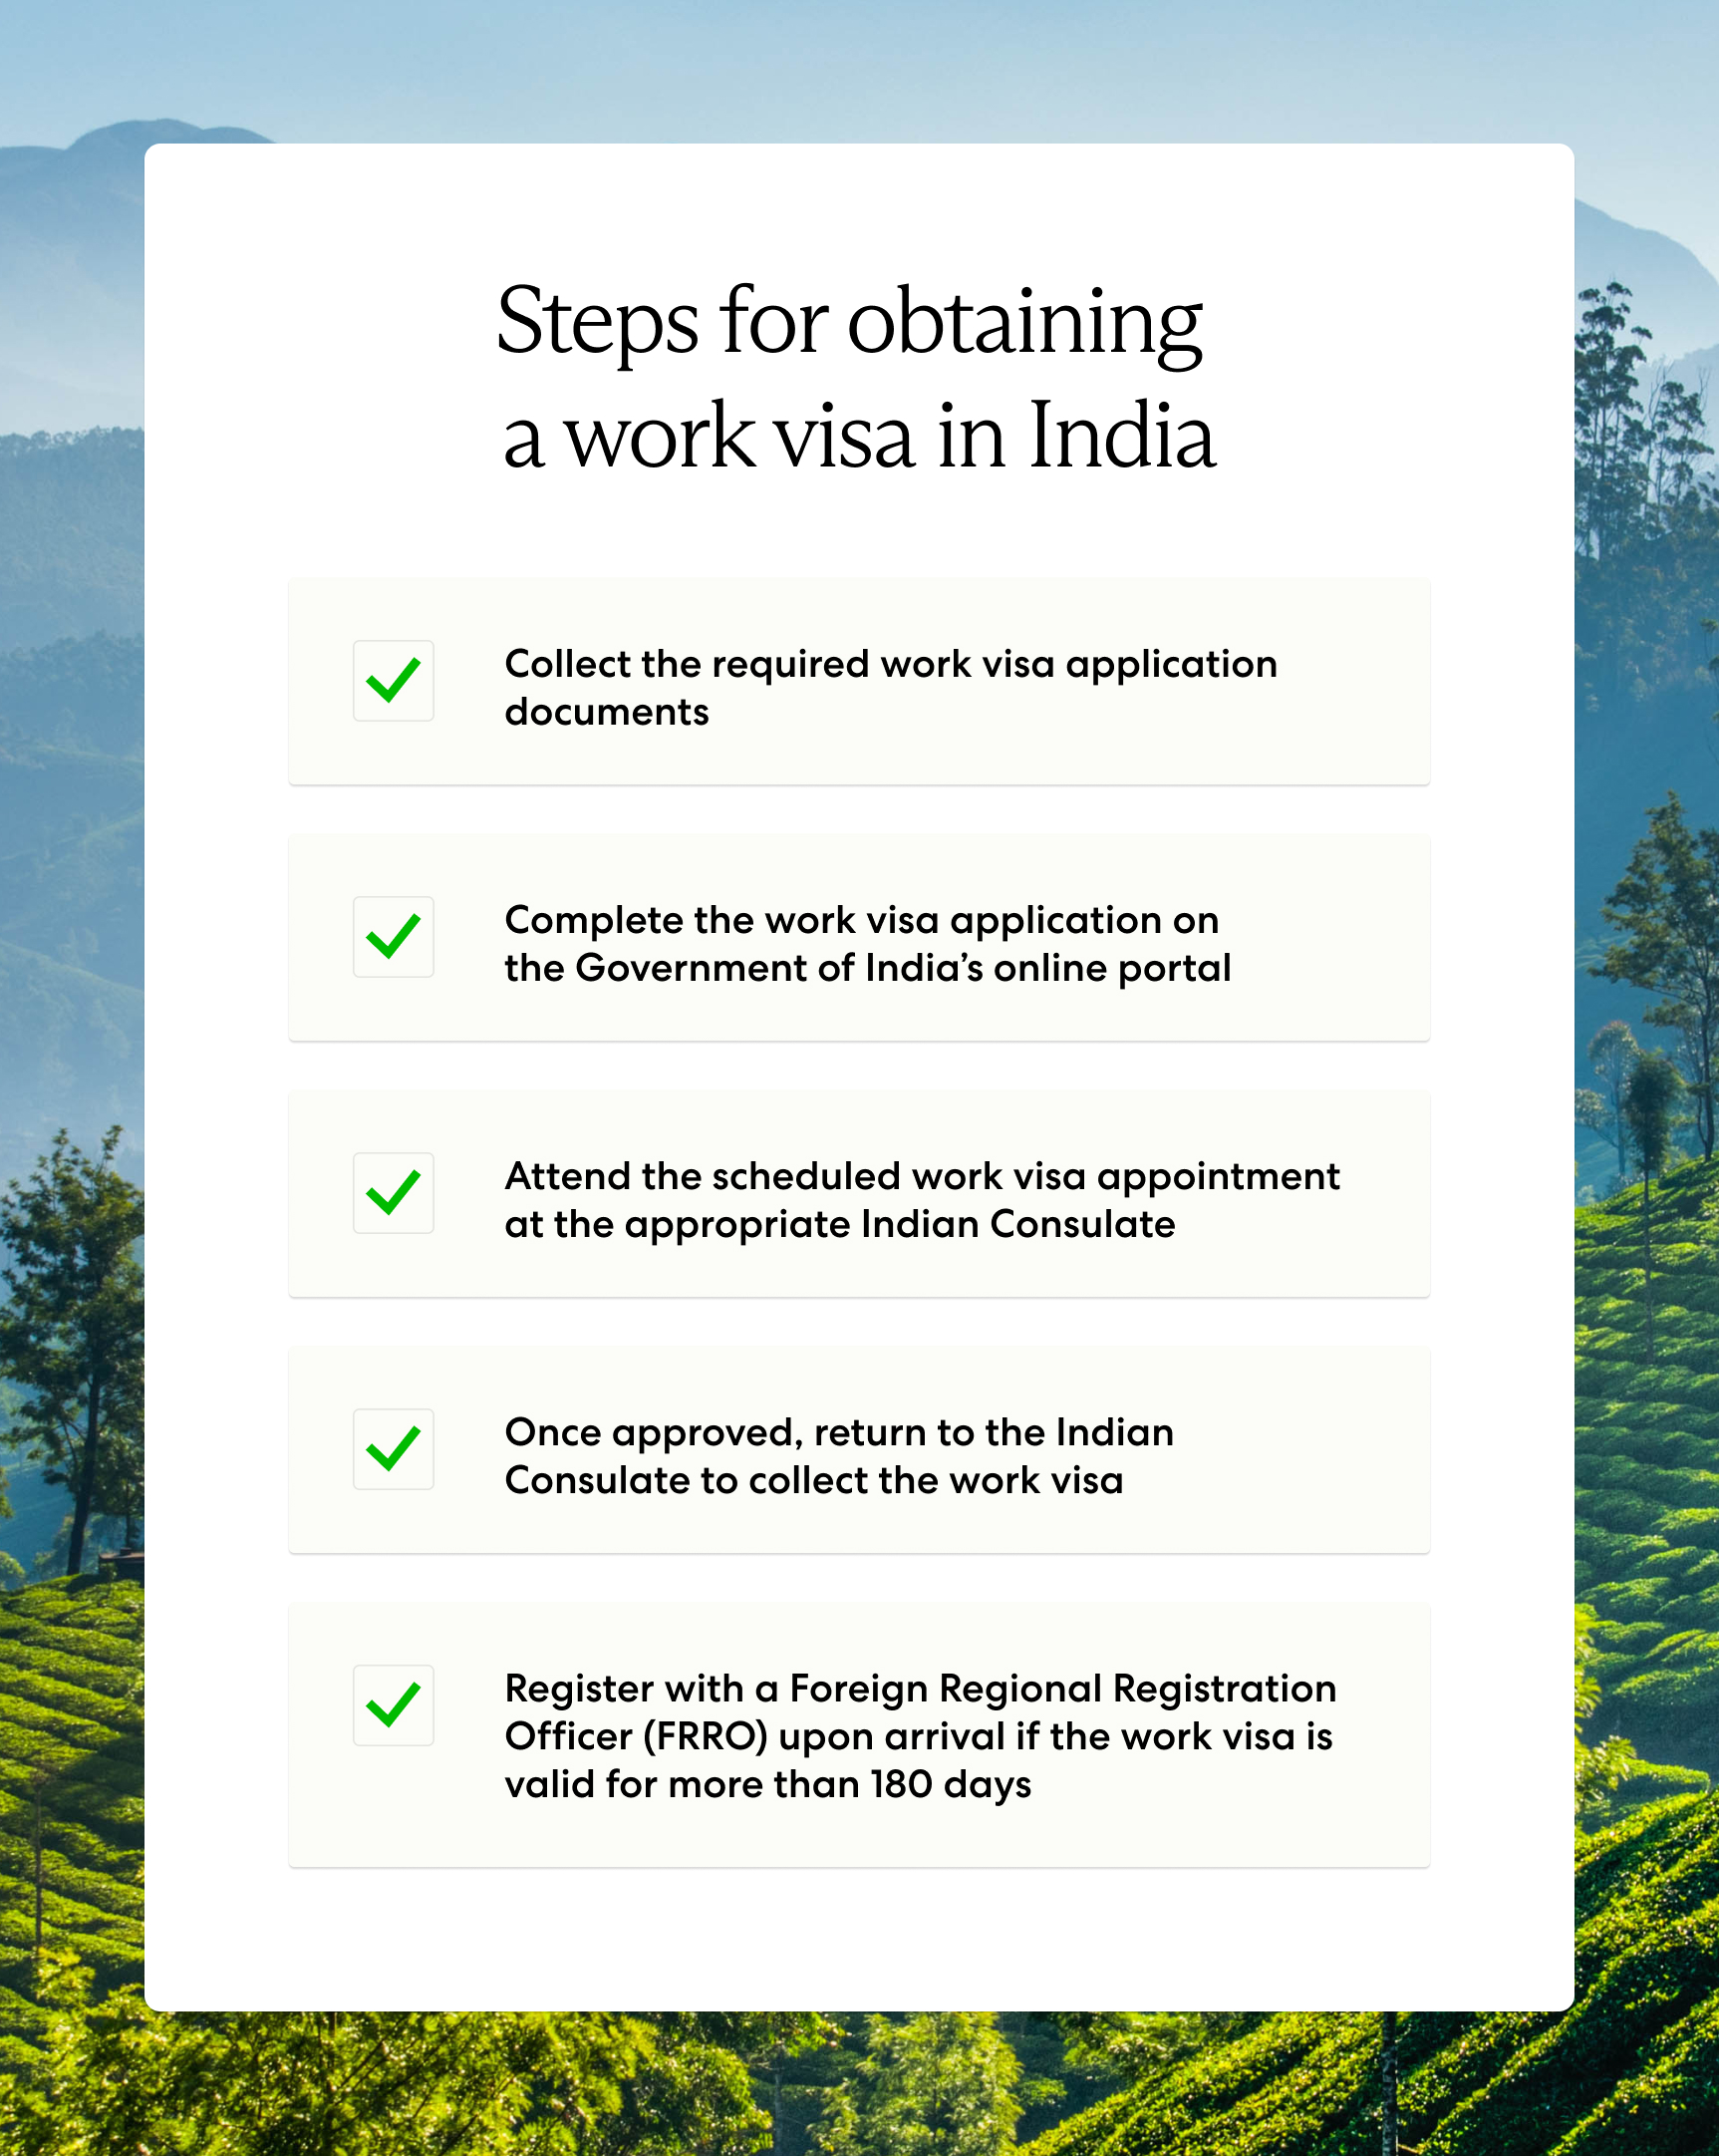 Steps for how to obtain legal work authorization in India